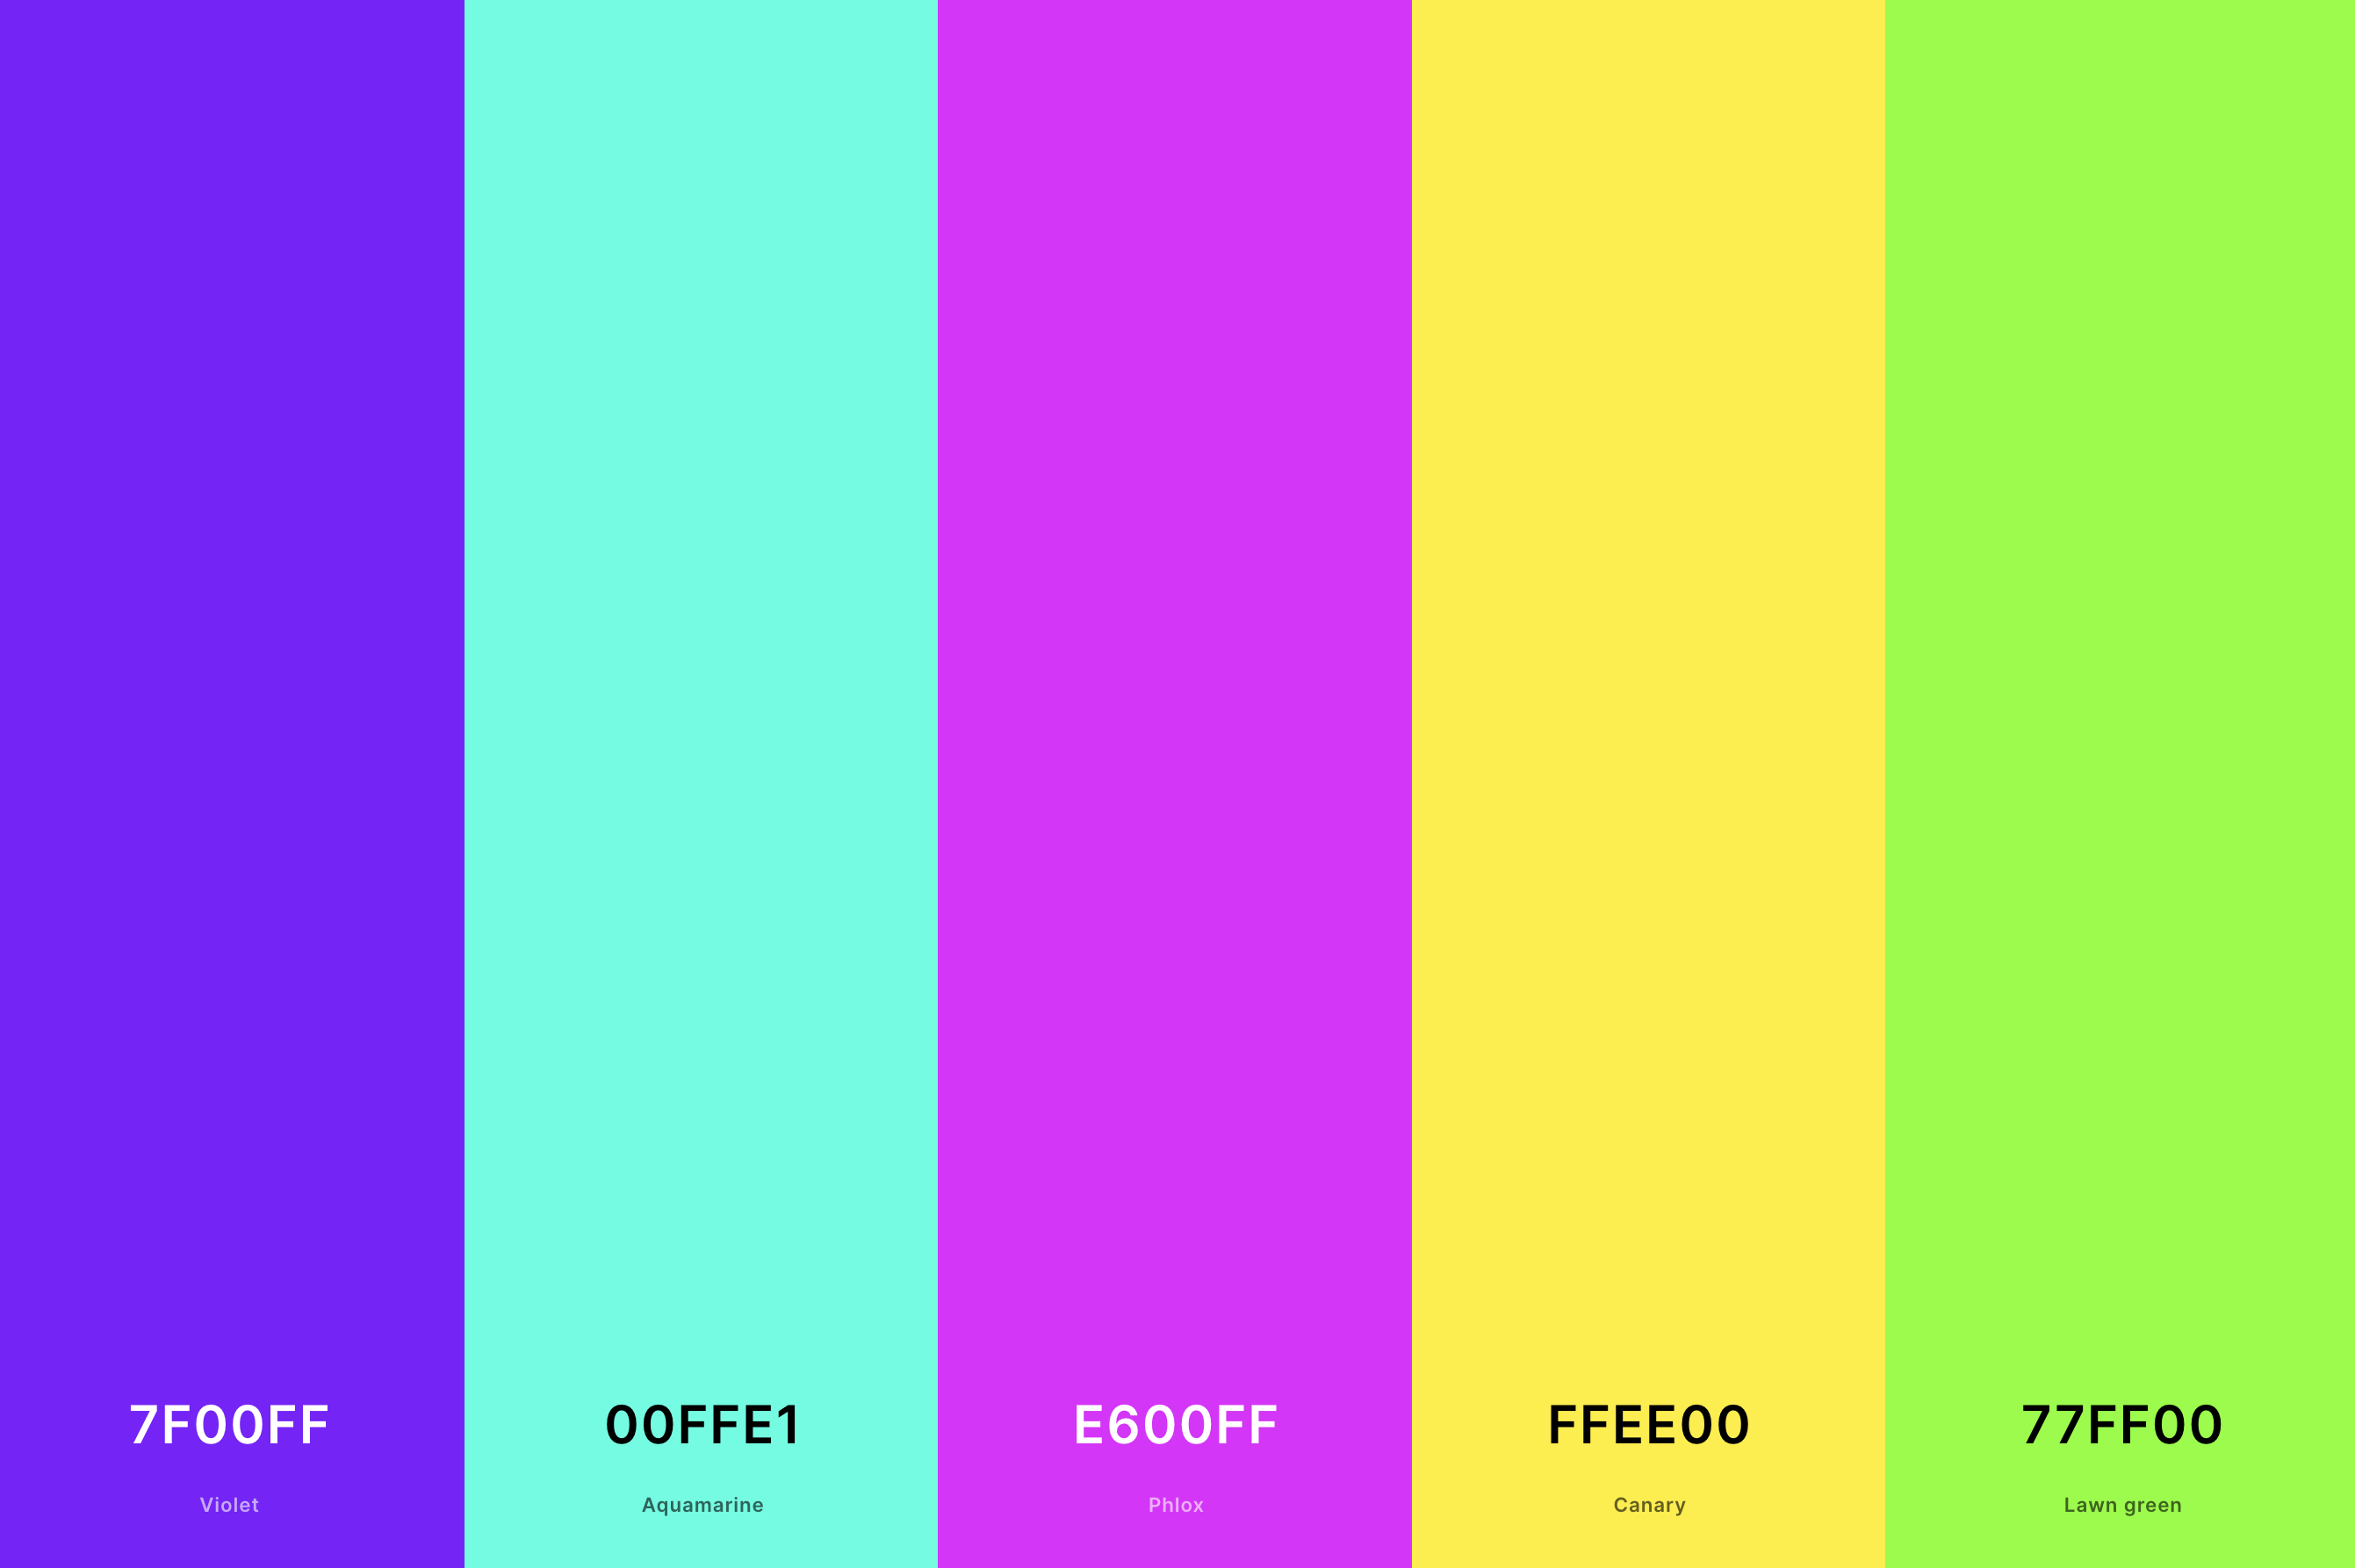 22. Neon Violet Color Palette Color Palette with Violet (Hex #7F00FF) + Aquamarine (Hex #00FFE1) + Phlox (Hex #E600FF) + Canary (Hex #FFEE00) + Lawn Green (Hex #77FF00) Color Palette with Hex Codes